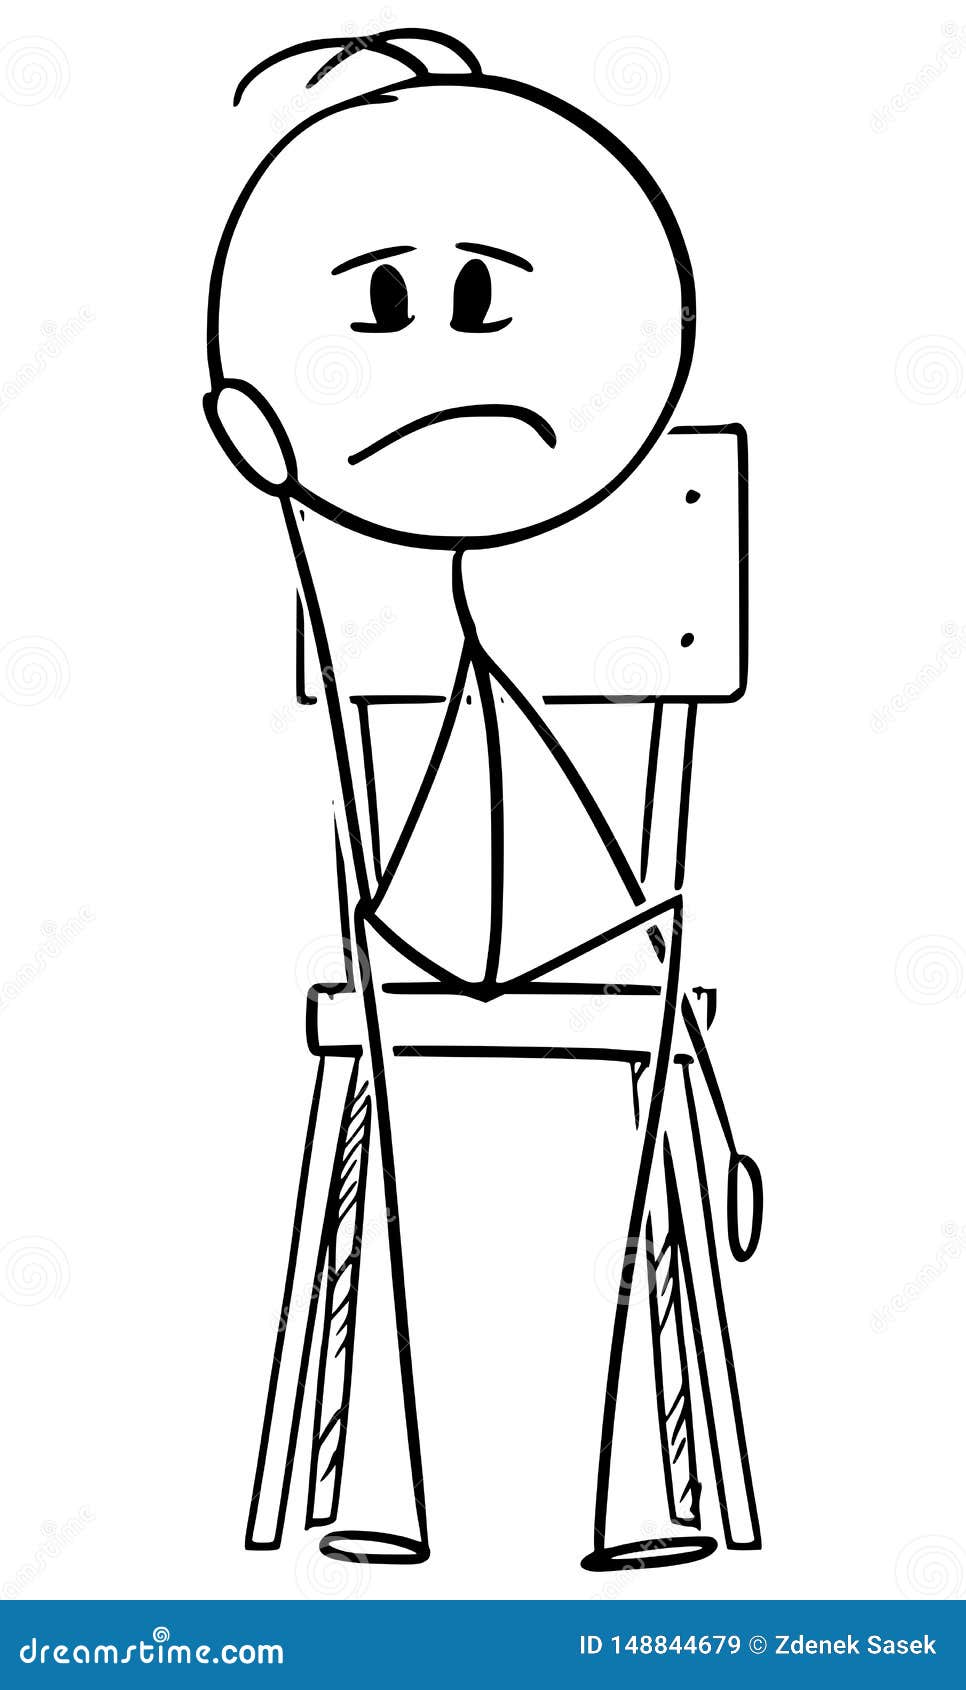 Tired Stick Man Or Stick Figure Sitting And Thinking Royalty-Free